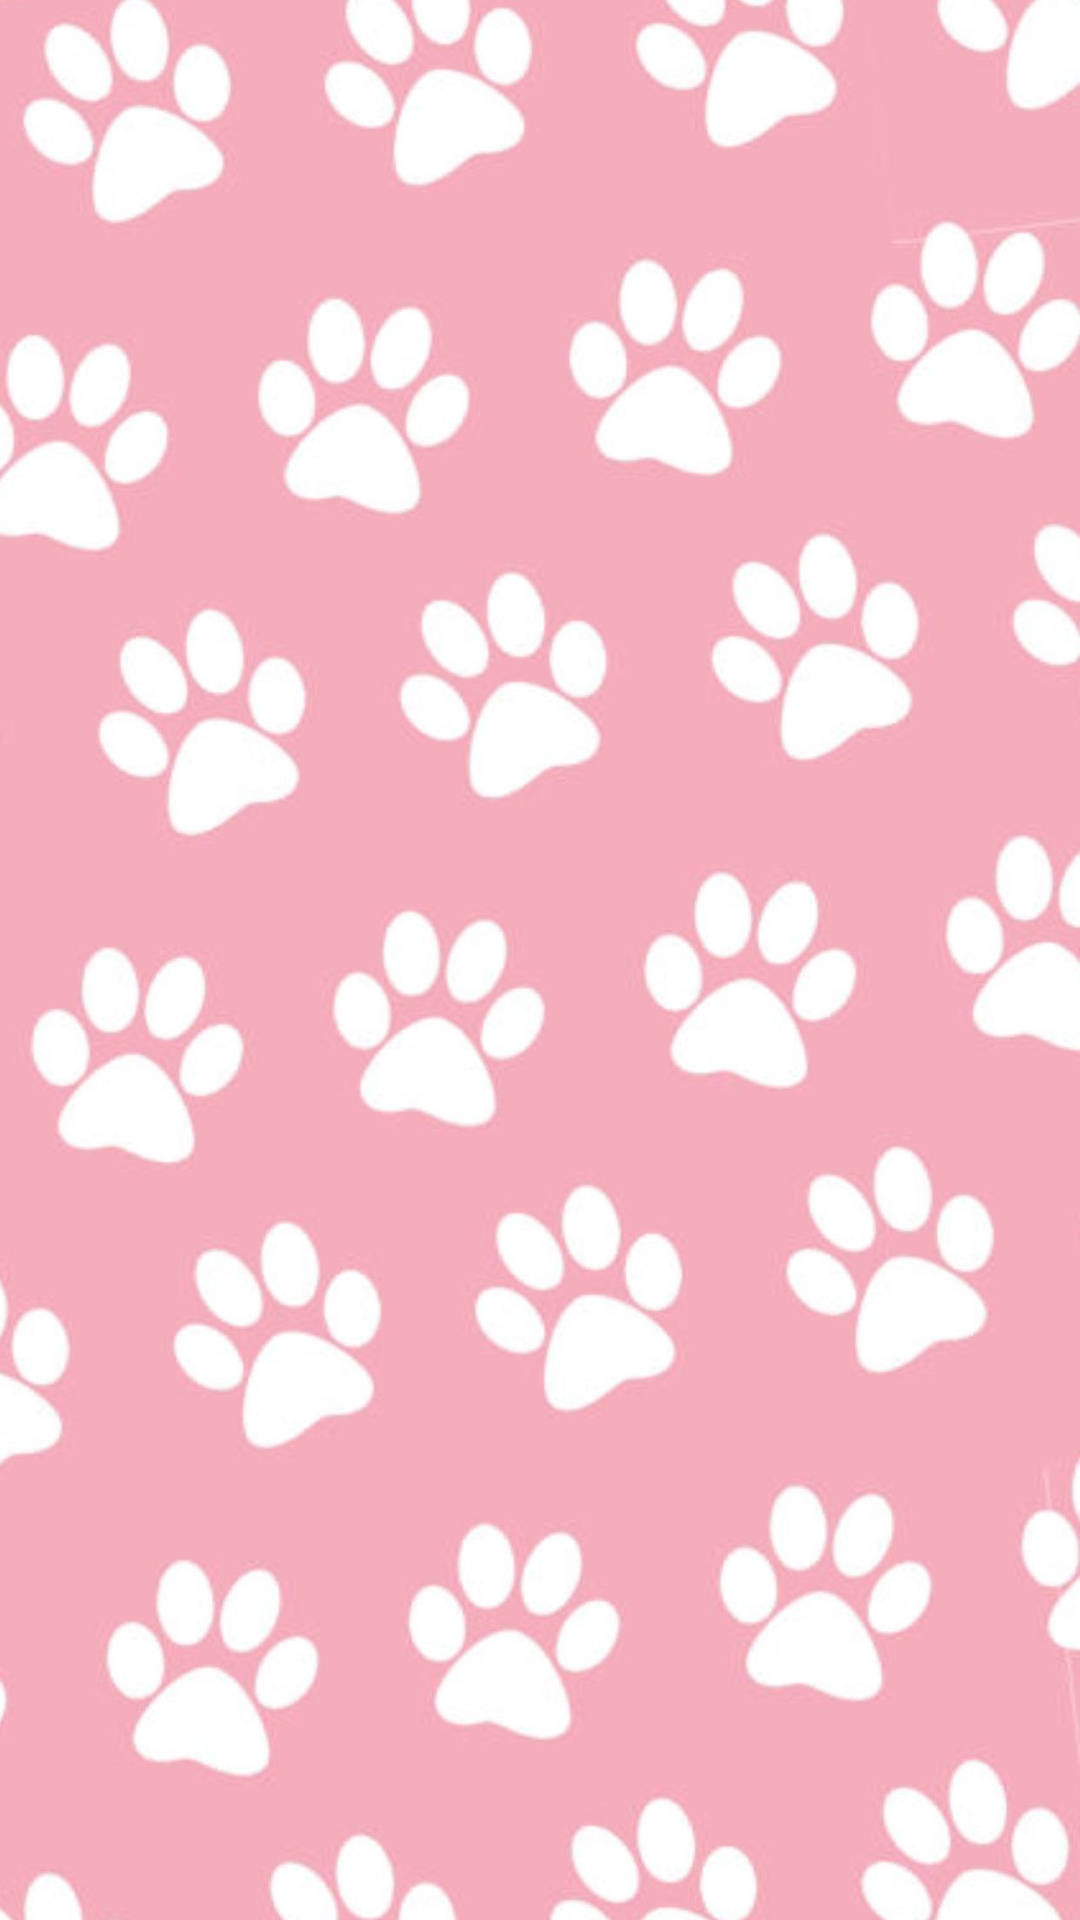 Paw Prints On Pink Background